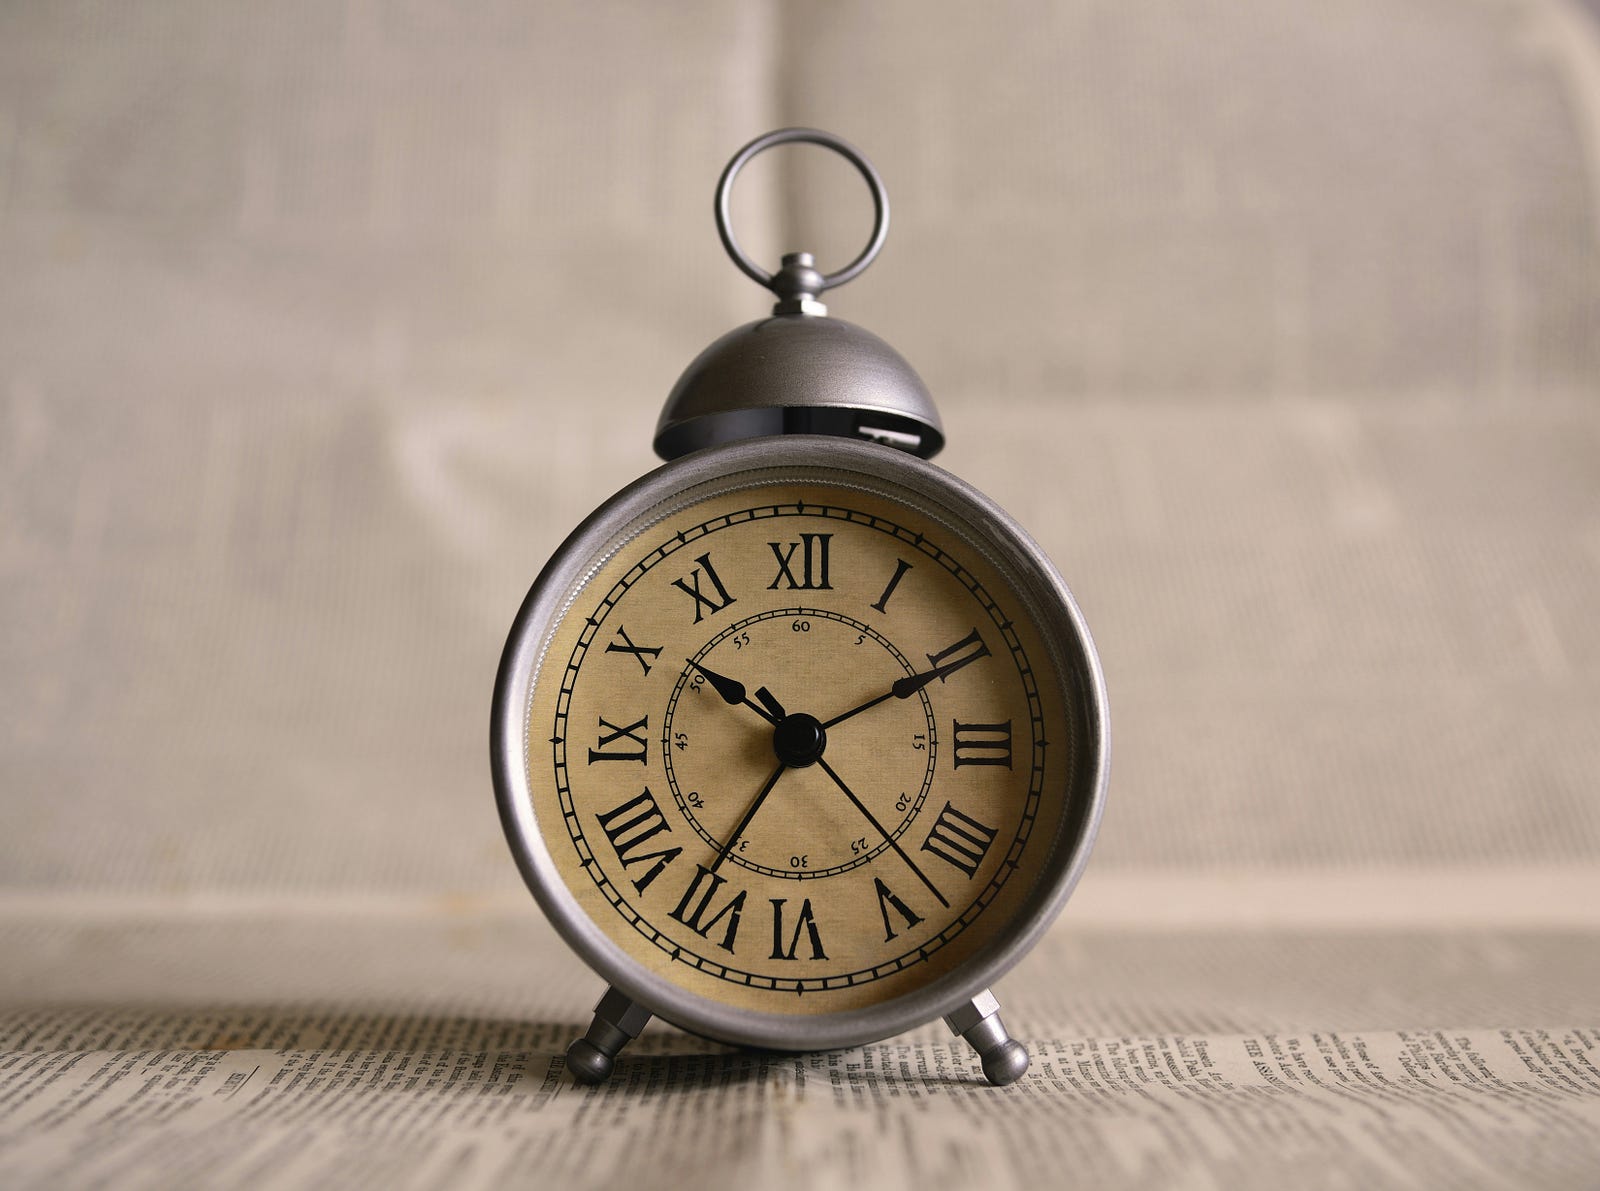 An old-fashioned alarm clock, with a bell atop it. For most people, the best time to take a nap is either just before or during the post-lunch dip. The post-lunch dip is the period of decreased alertness and productivity often experienced after a midday meal.